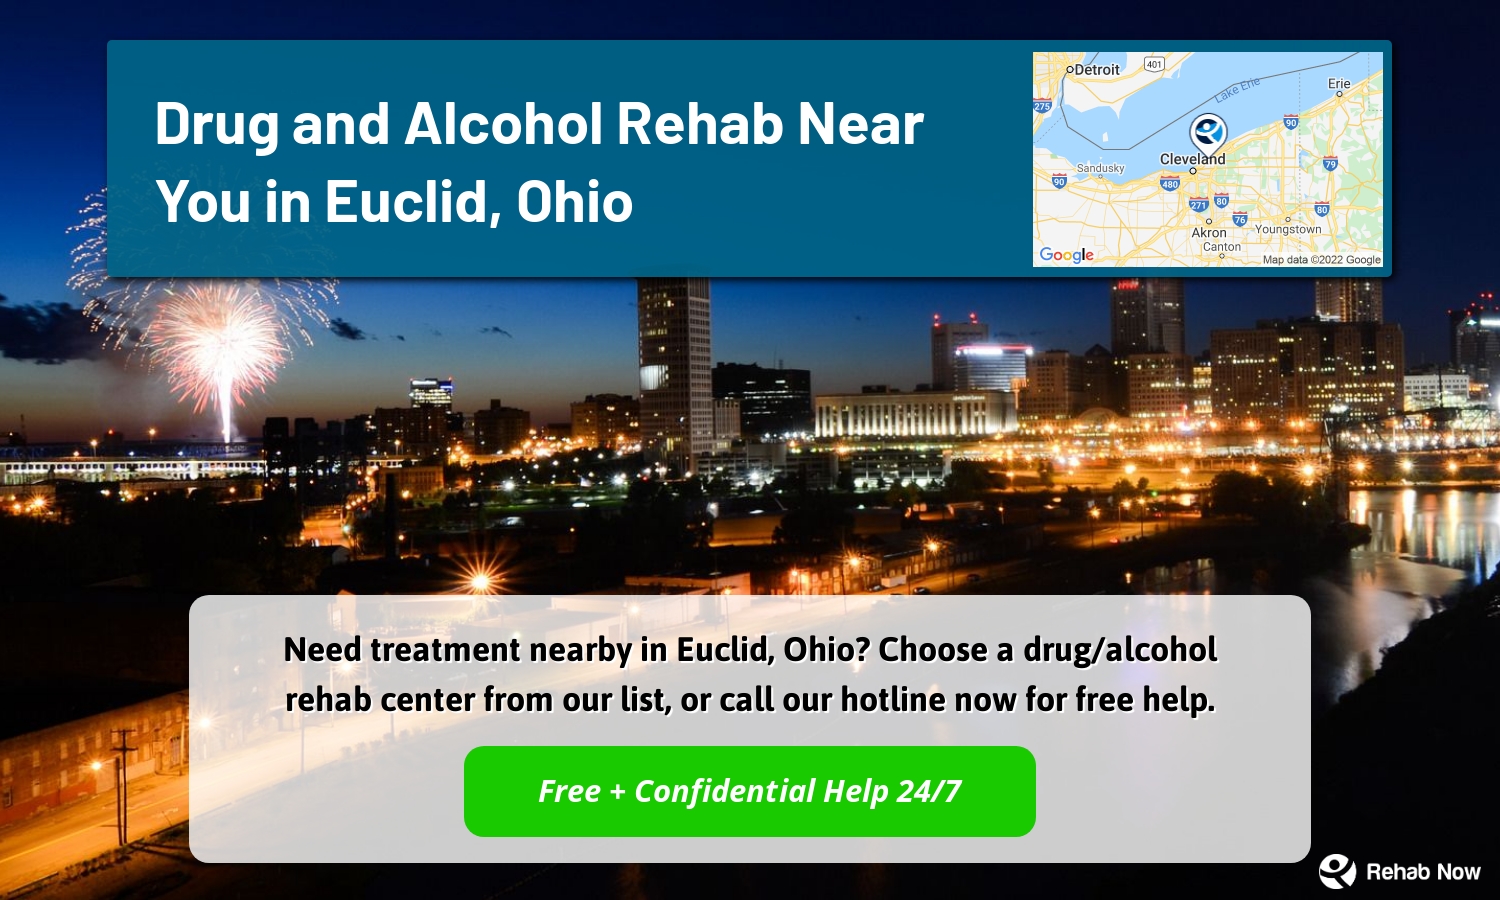 Need treatment nearby in Euclid, Ohio? Choose a drug/alcohol rehab center from our list, or call our hotline now for free help.